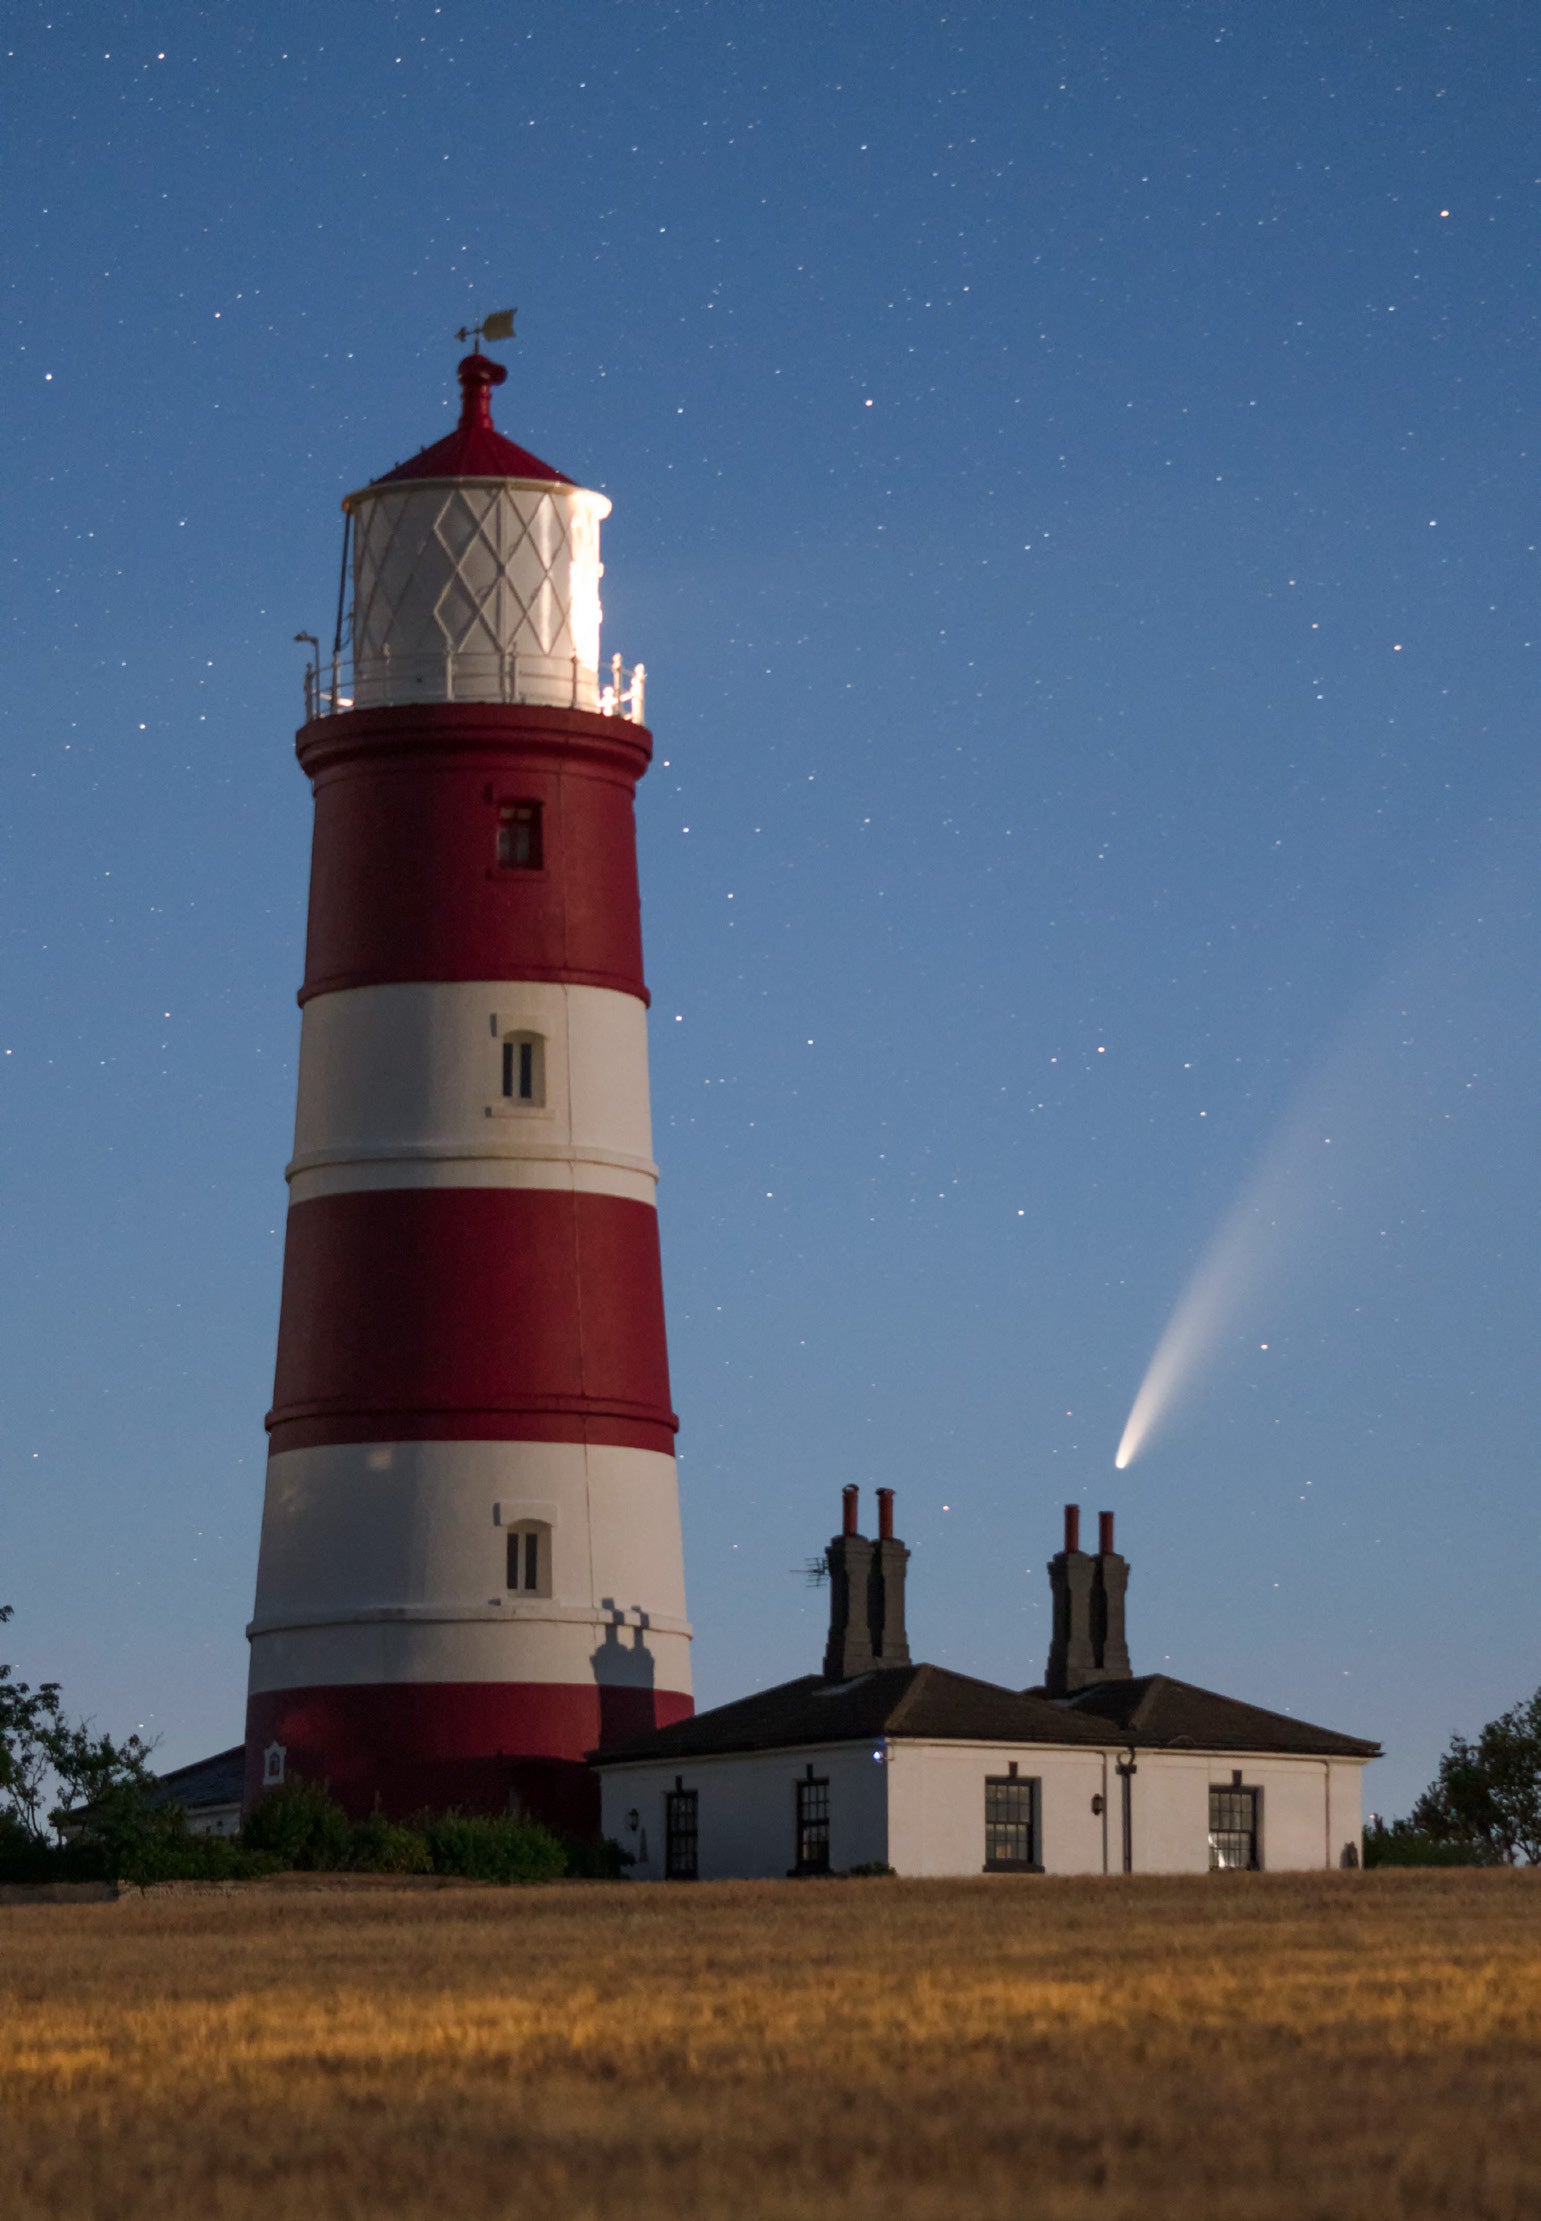 Neowise comet as photographed at night against a Norfolk, UK lighthouse and starlight sky